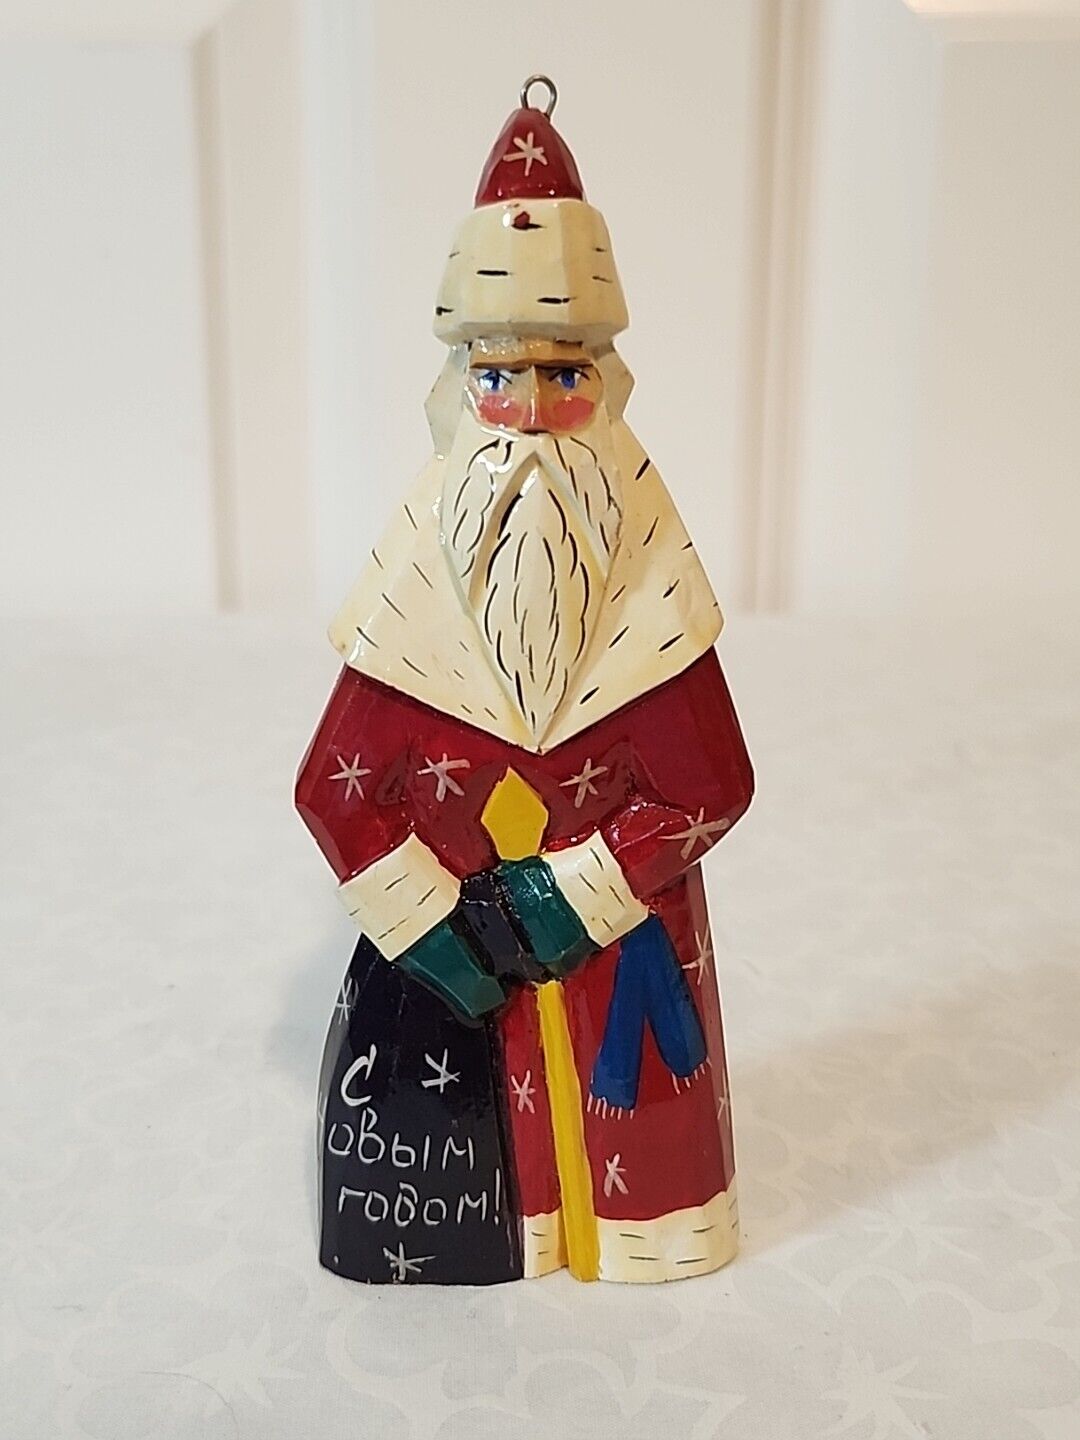 Russian Wood Carved Hand Painted Santa Claus Ded Moroz Ornament Figure - Signed